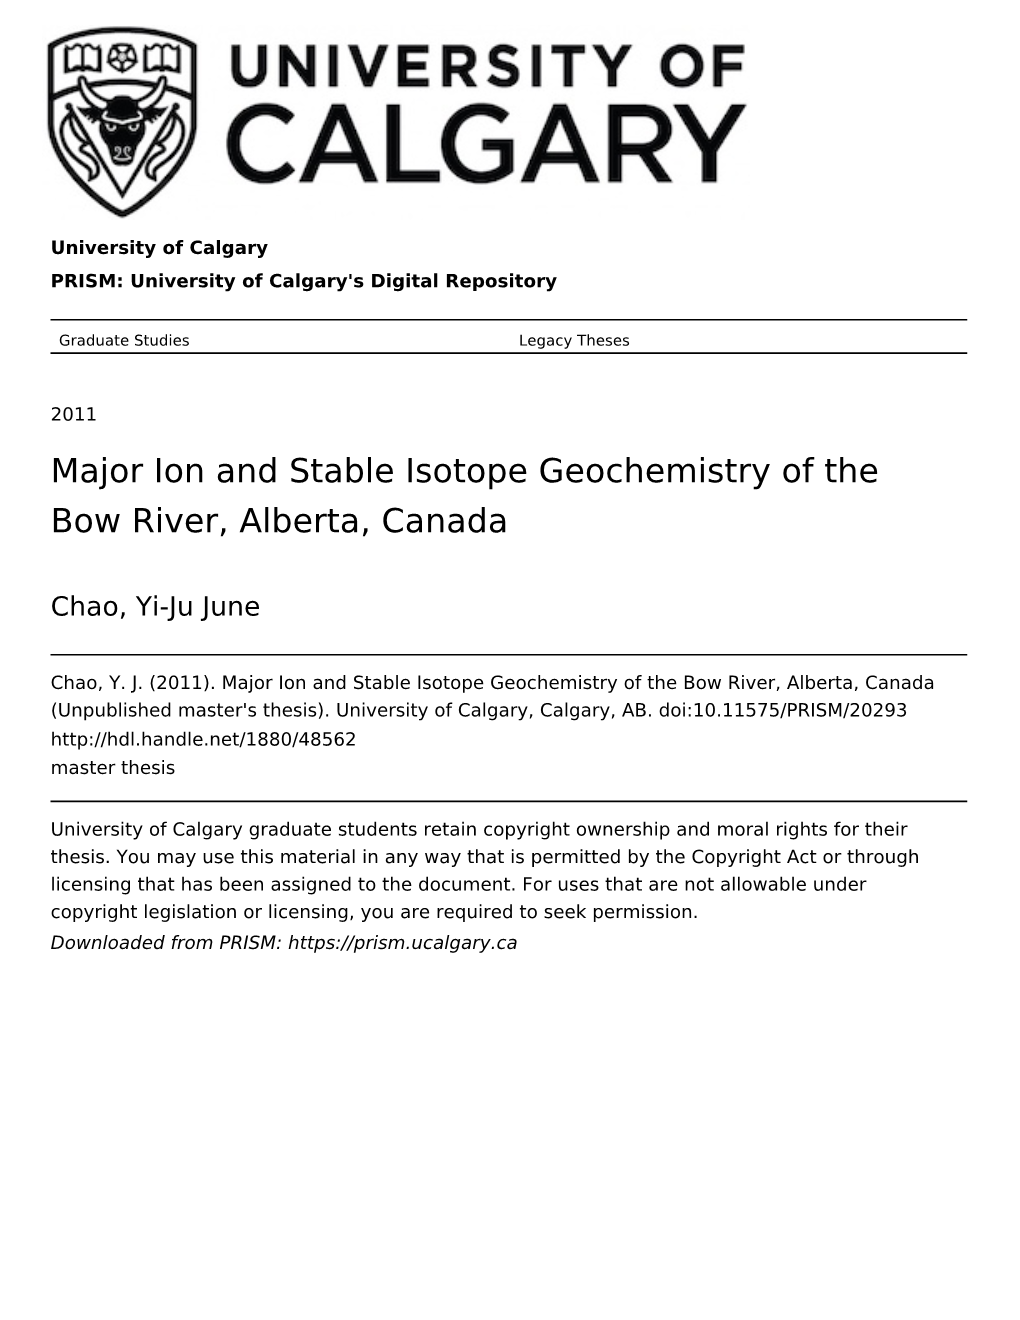 Major Ion and Stable Isotope Geochemistry of the Bow River, Alberta, Canada